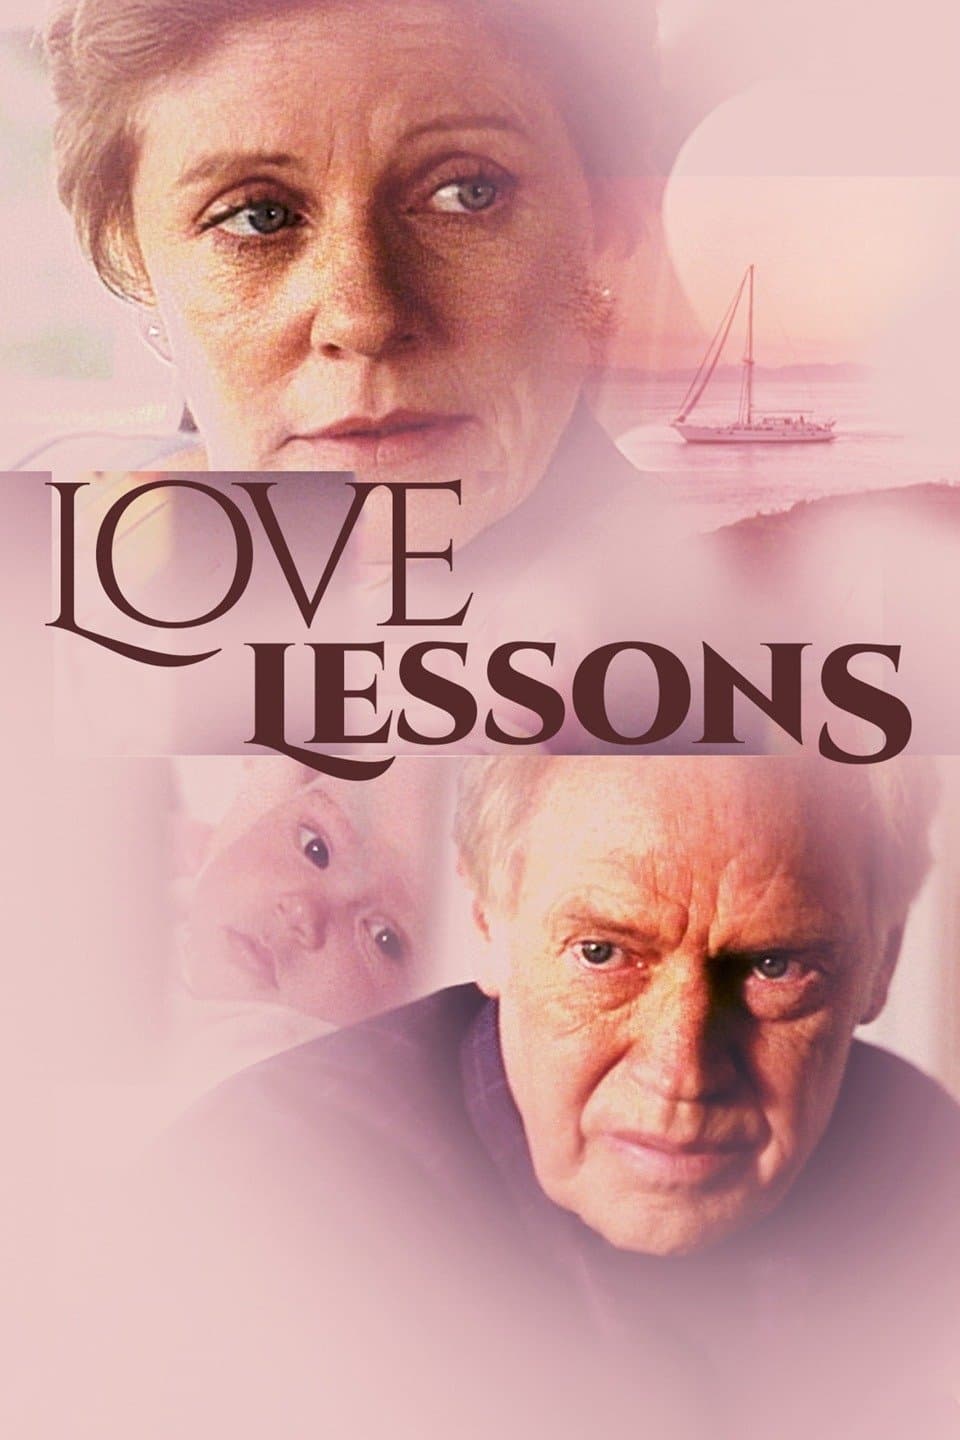 Love Lessons (2000)